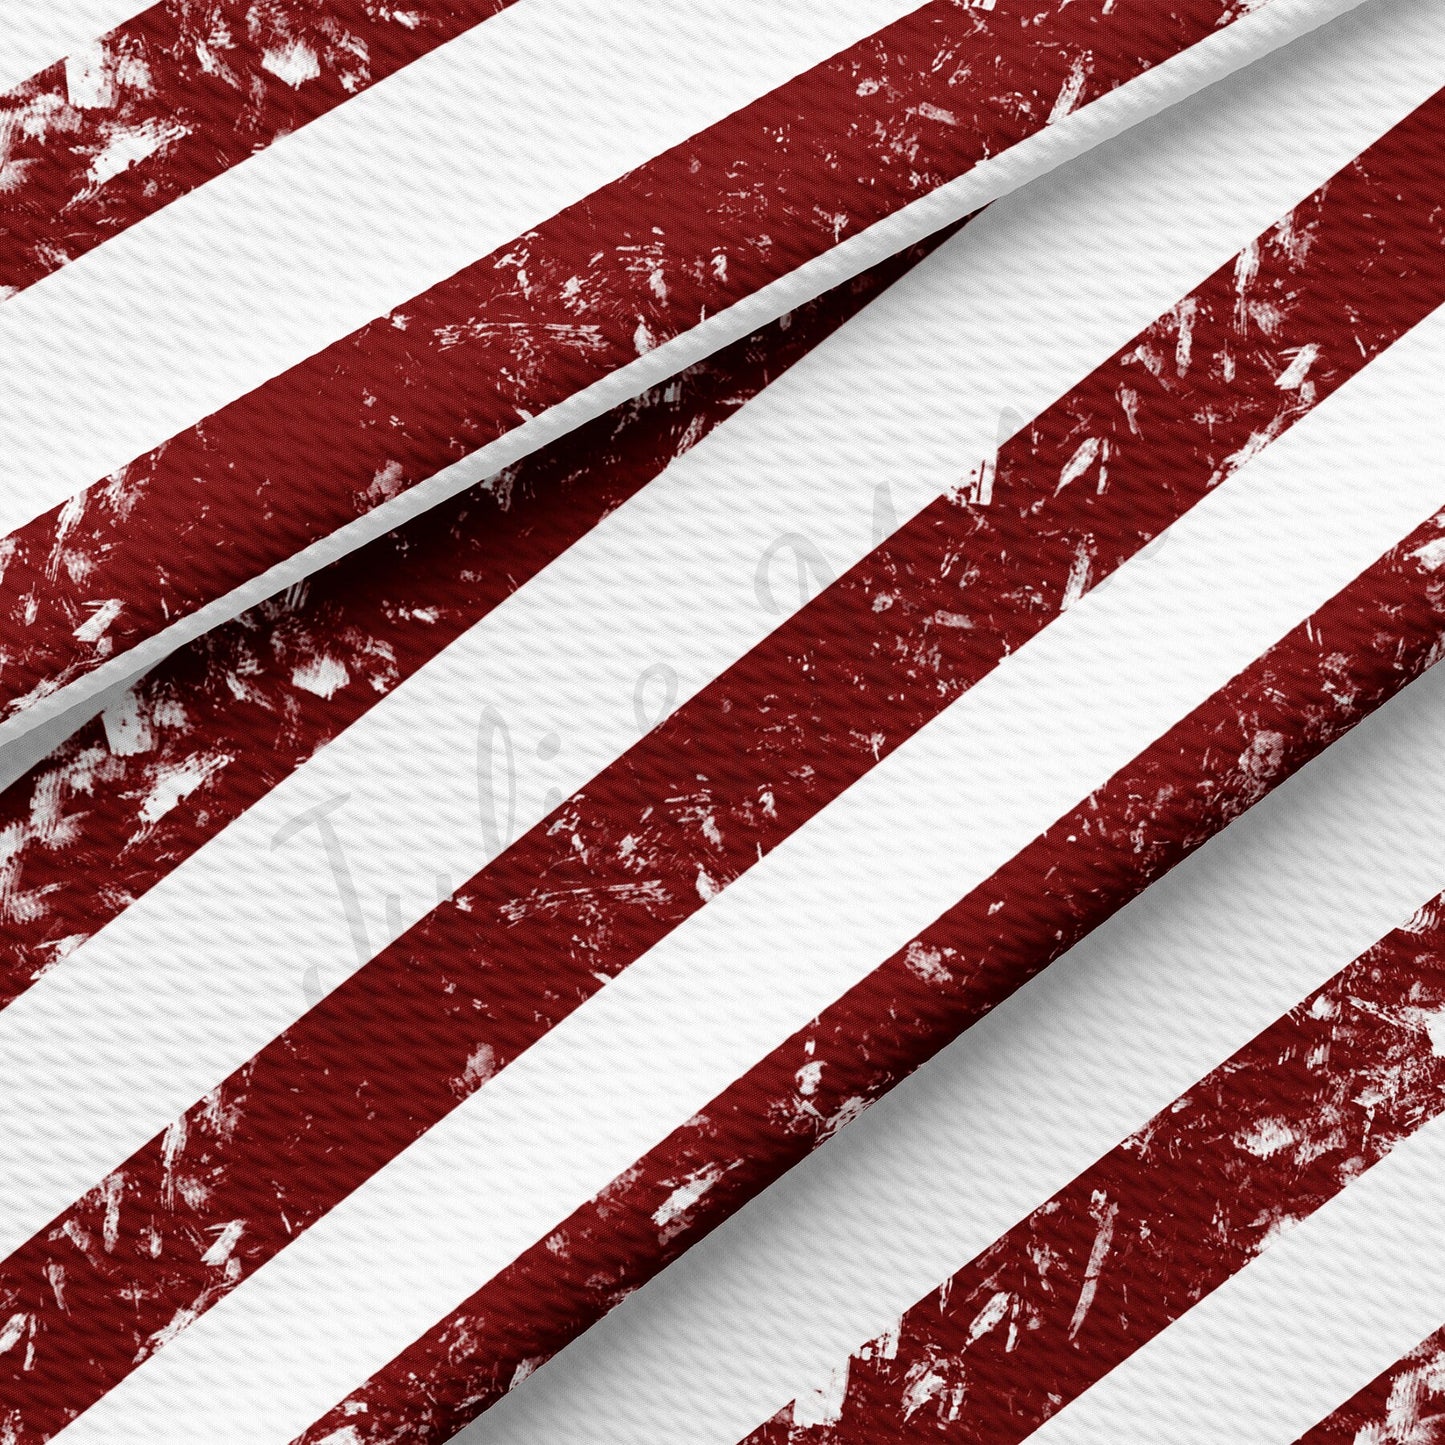 Horizontal Distressed Strips 4th of July Patriotic Bullet Textured Fabric  AA1535